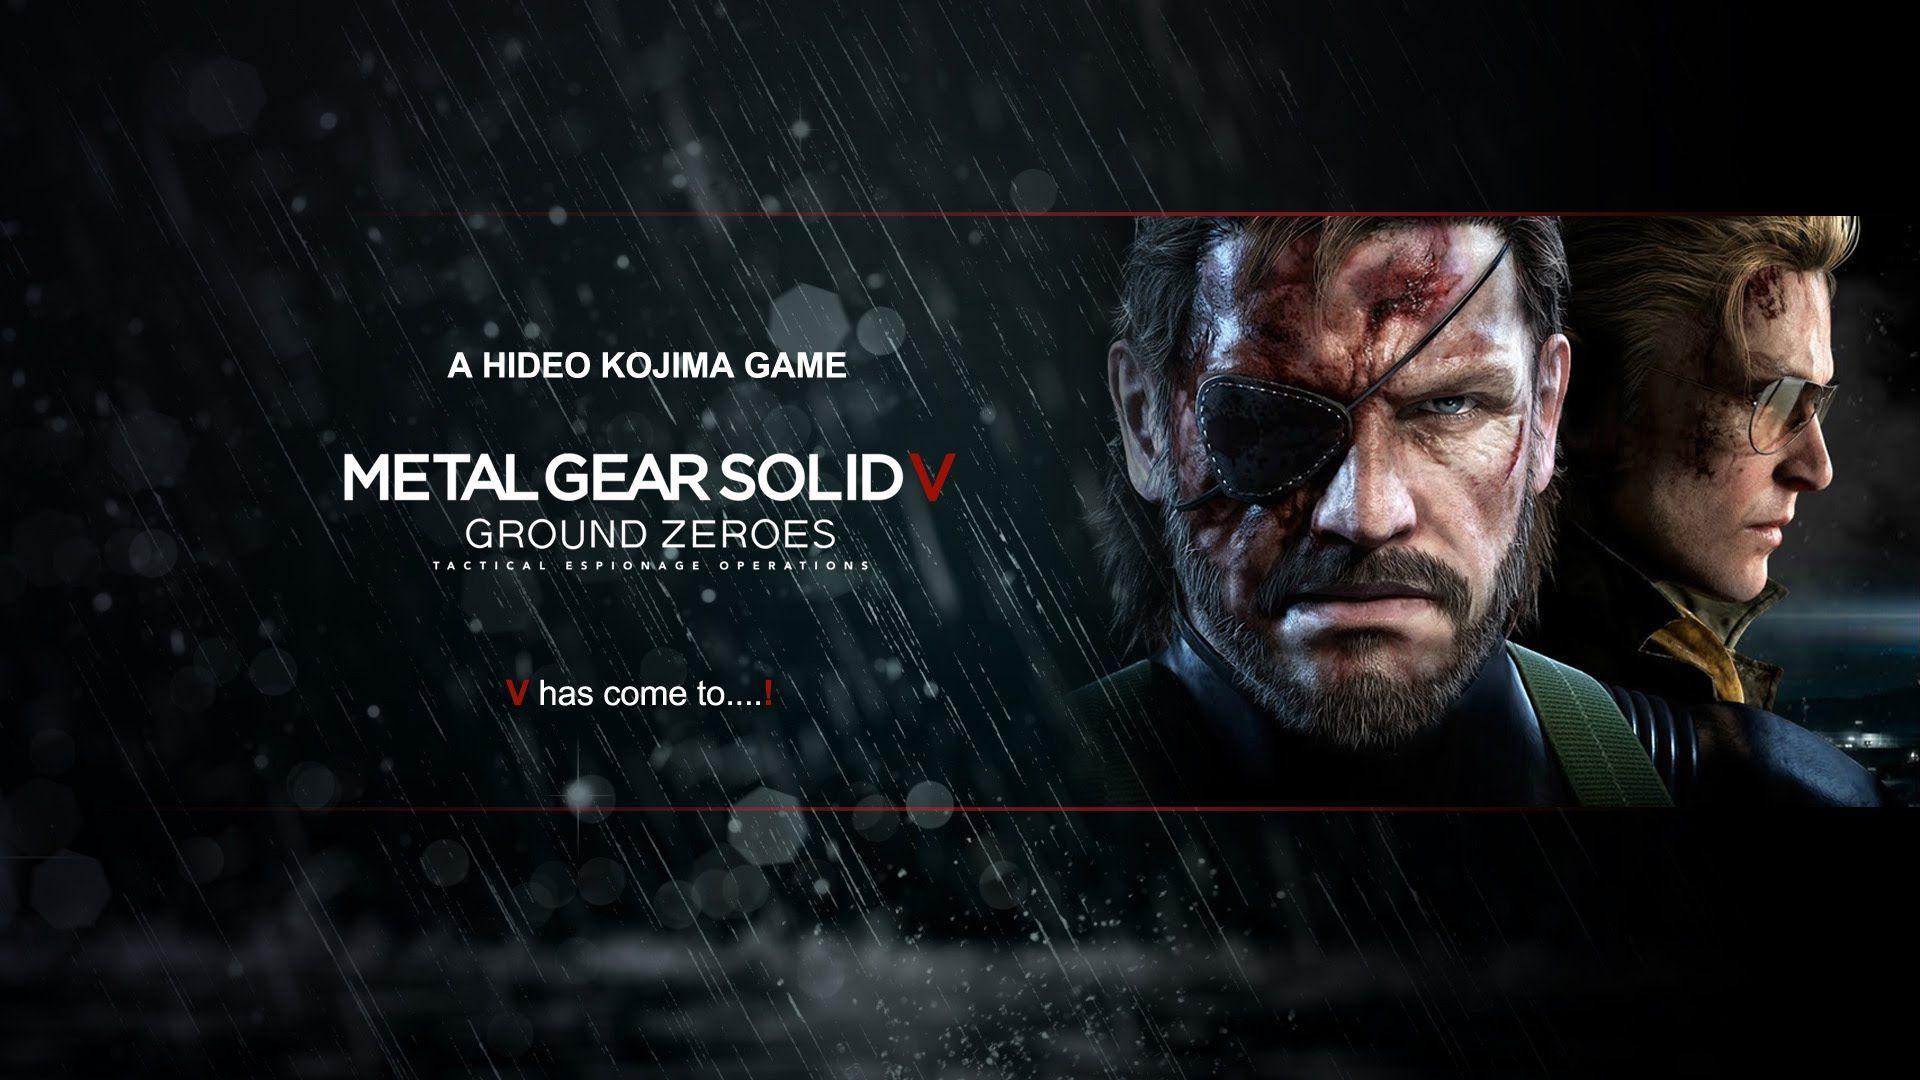 METAL GEAR SOLID V: GROUND ZEROES LIVE! MGSV: The Phantom Pain